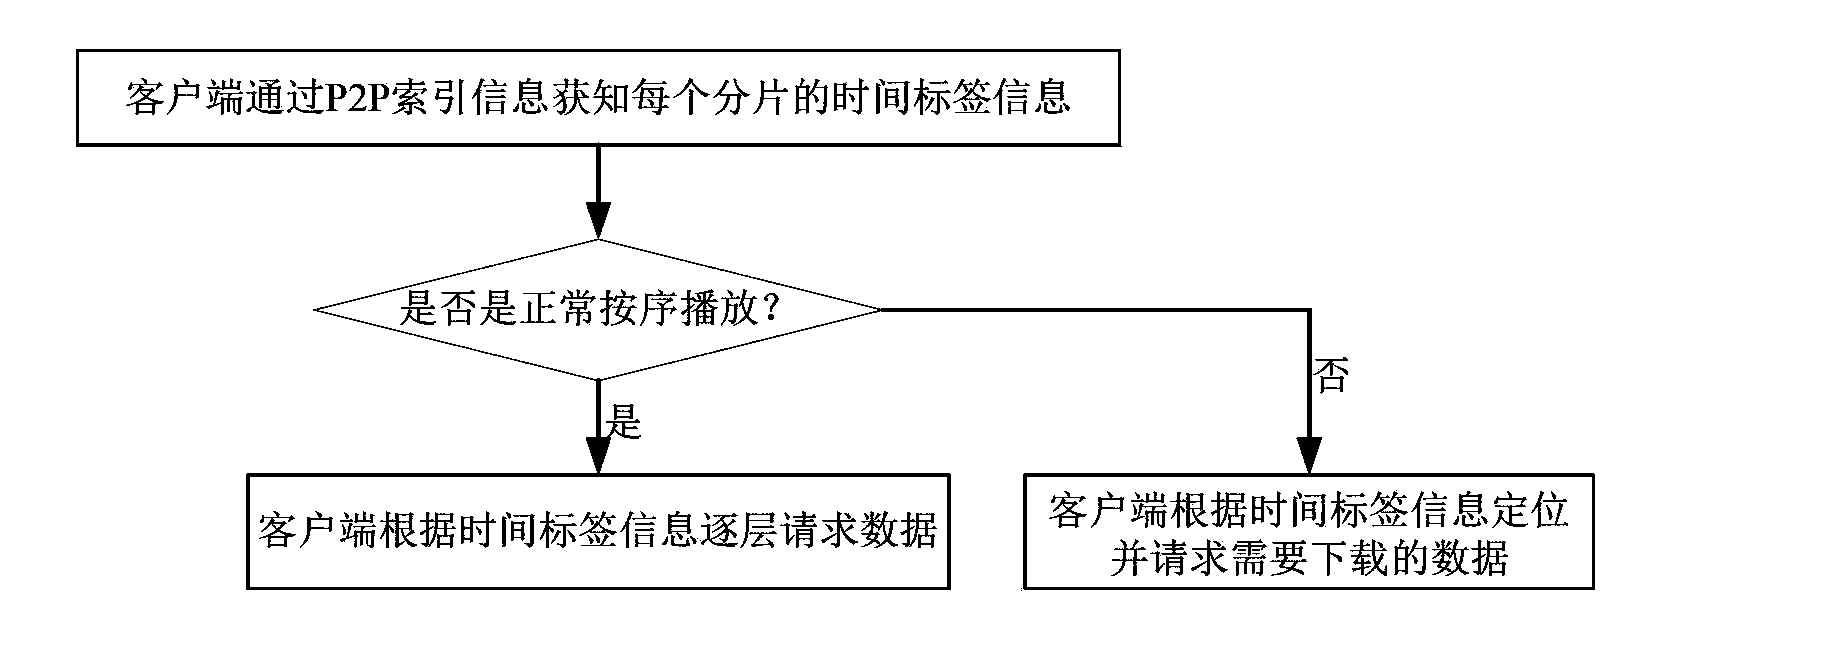 Data fragment transmitting and dispatching method and system in P2P streaming media system based on SVC